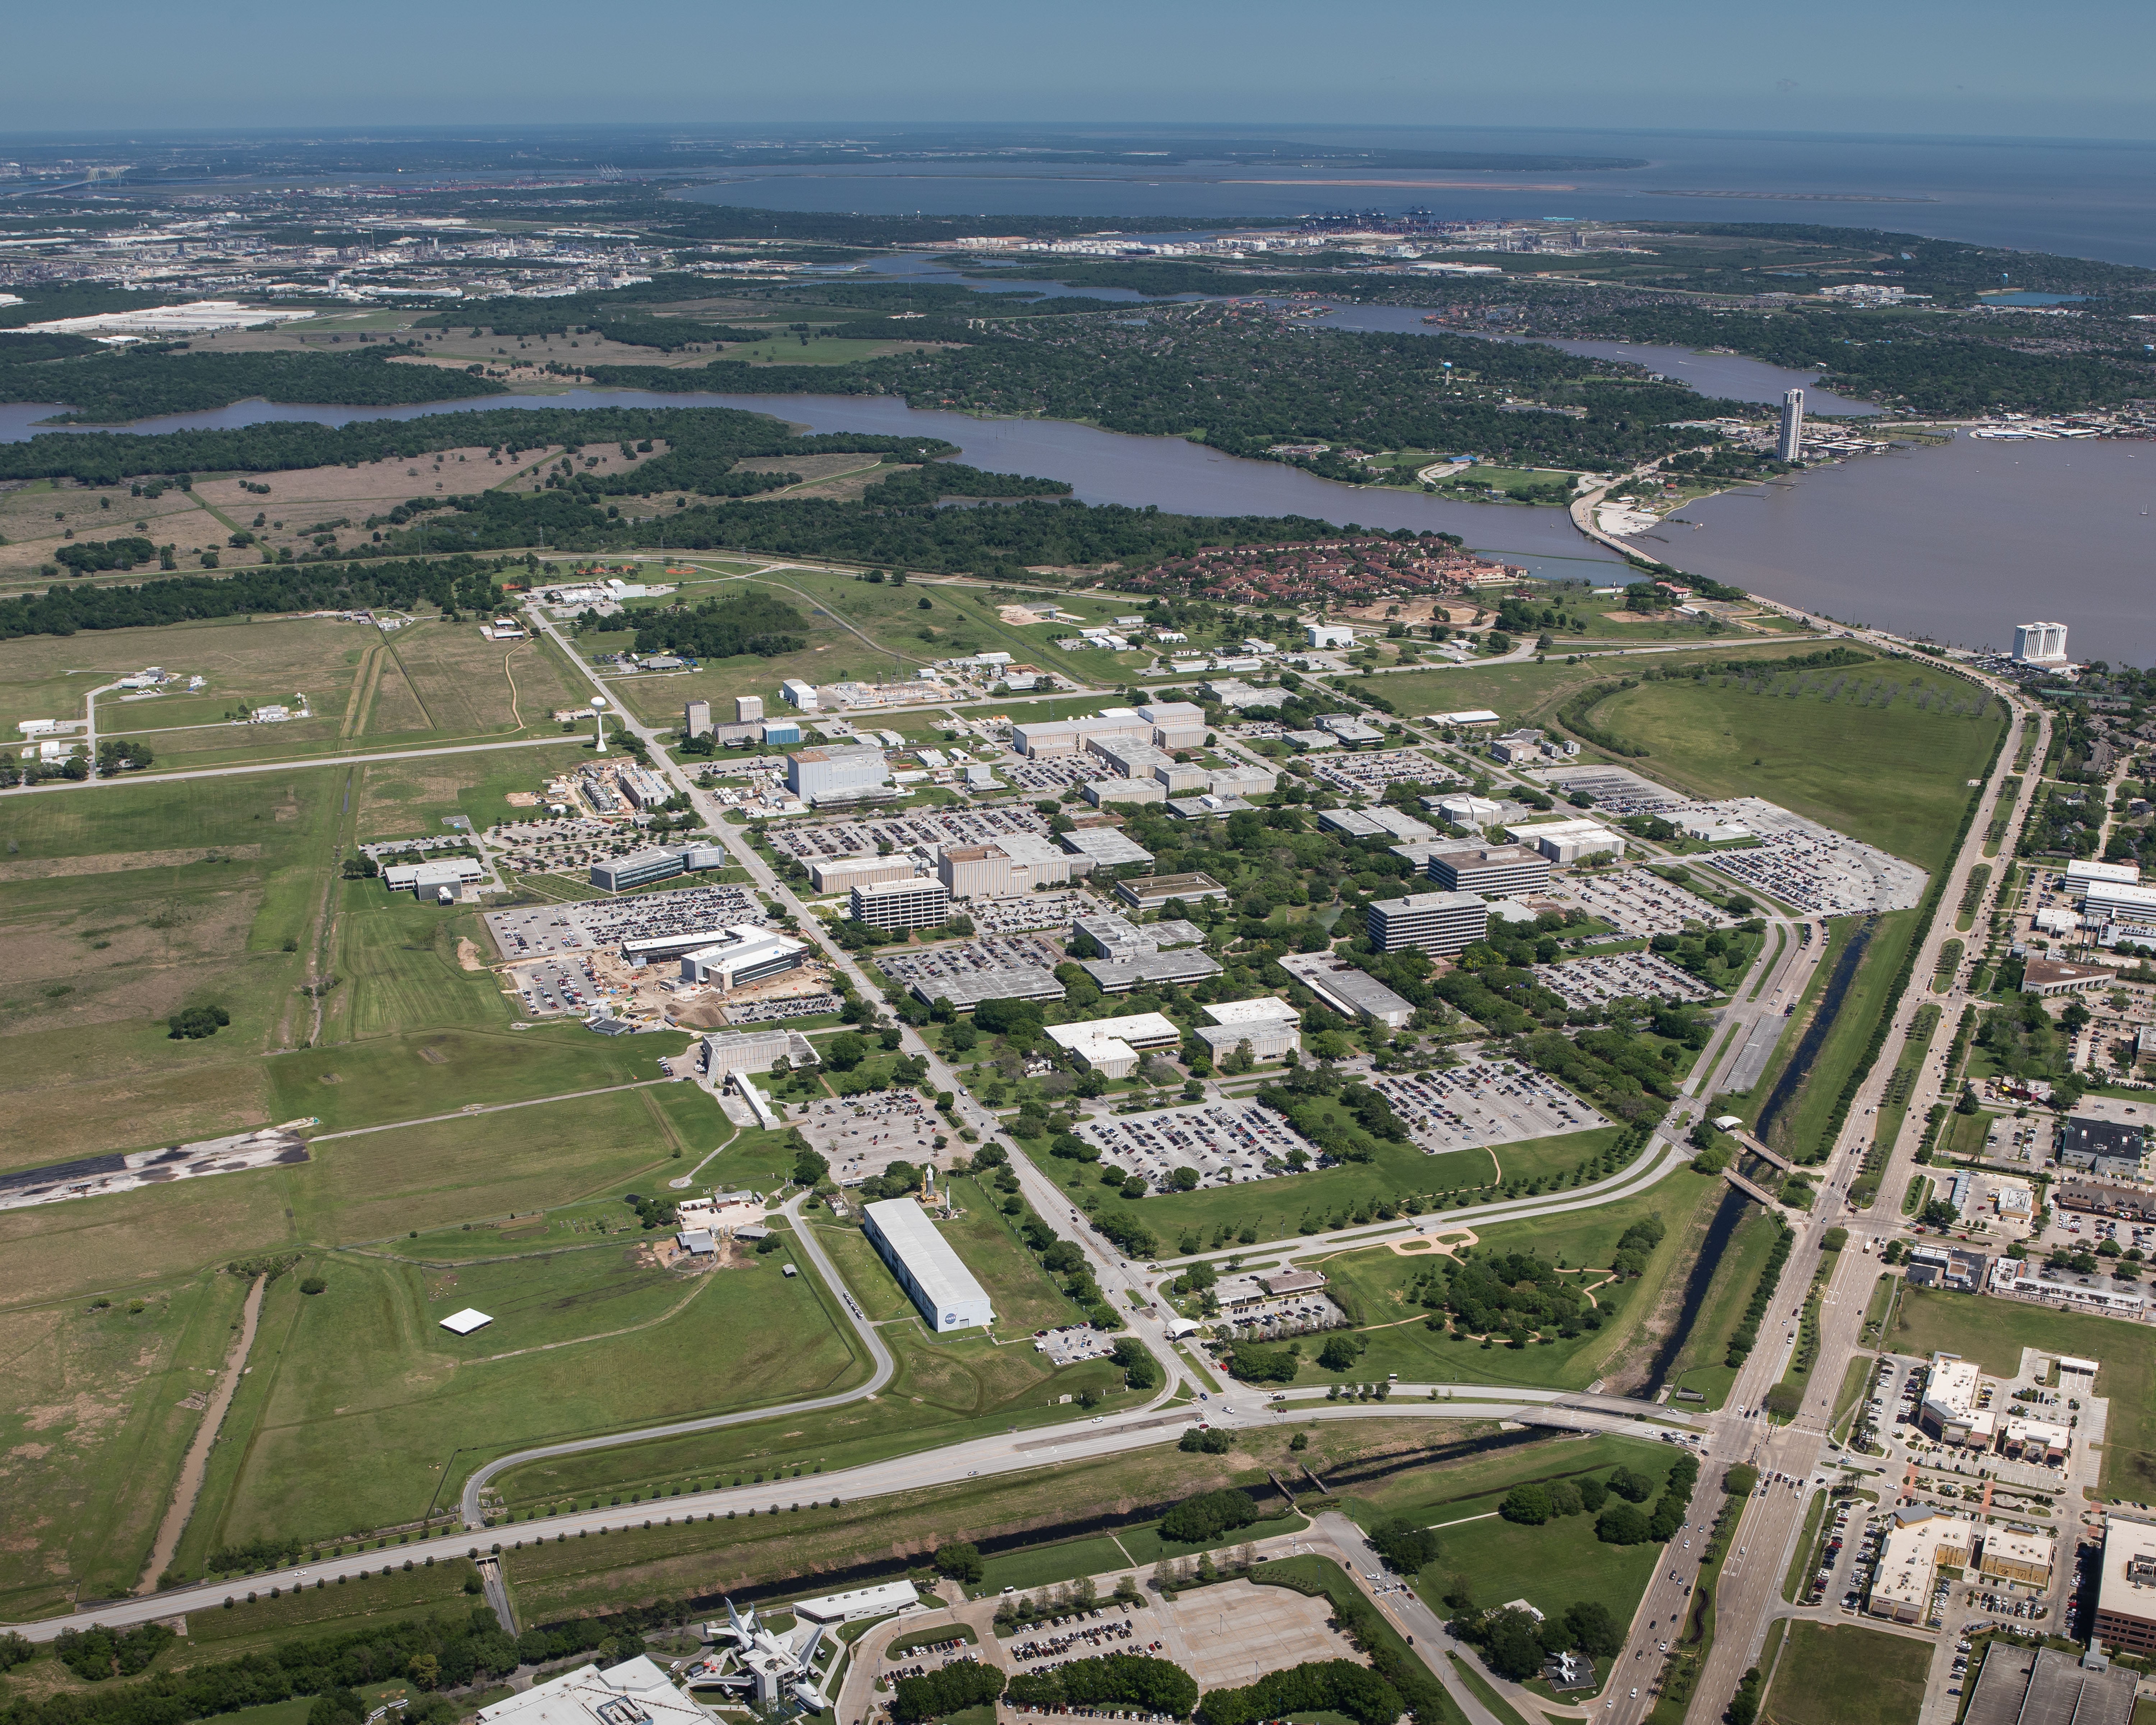 Nasa’s Johnson Space Center as seen from the air